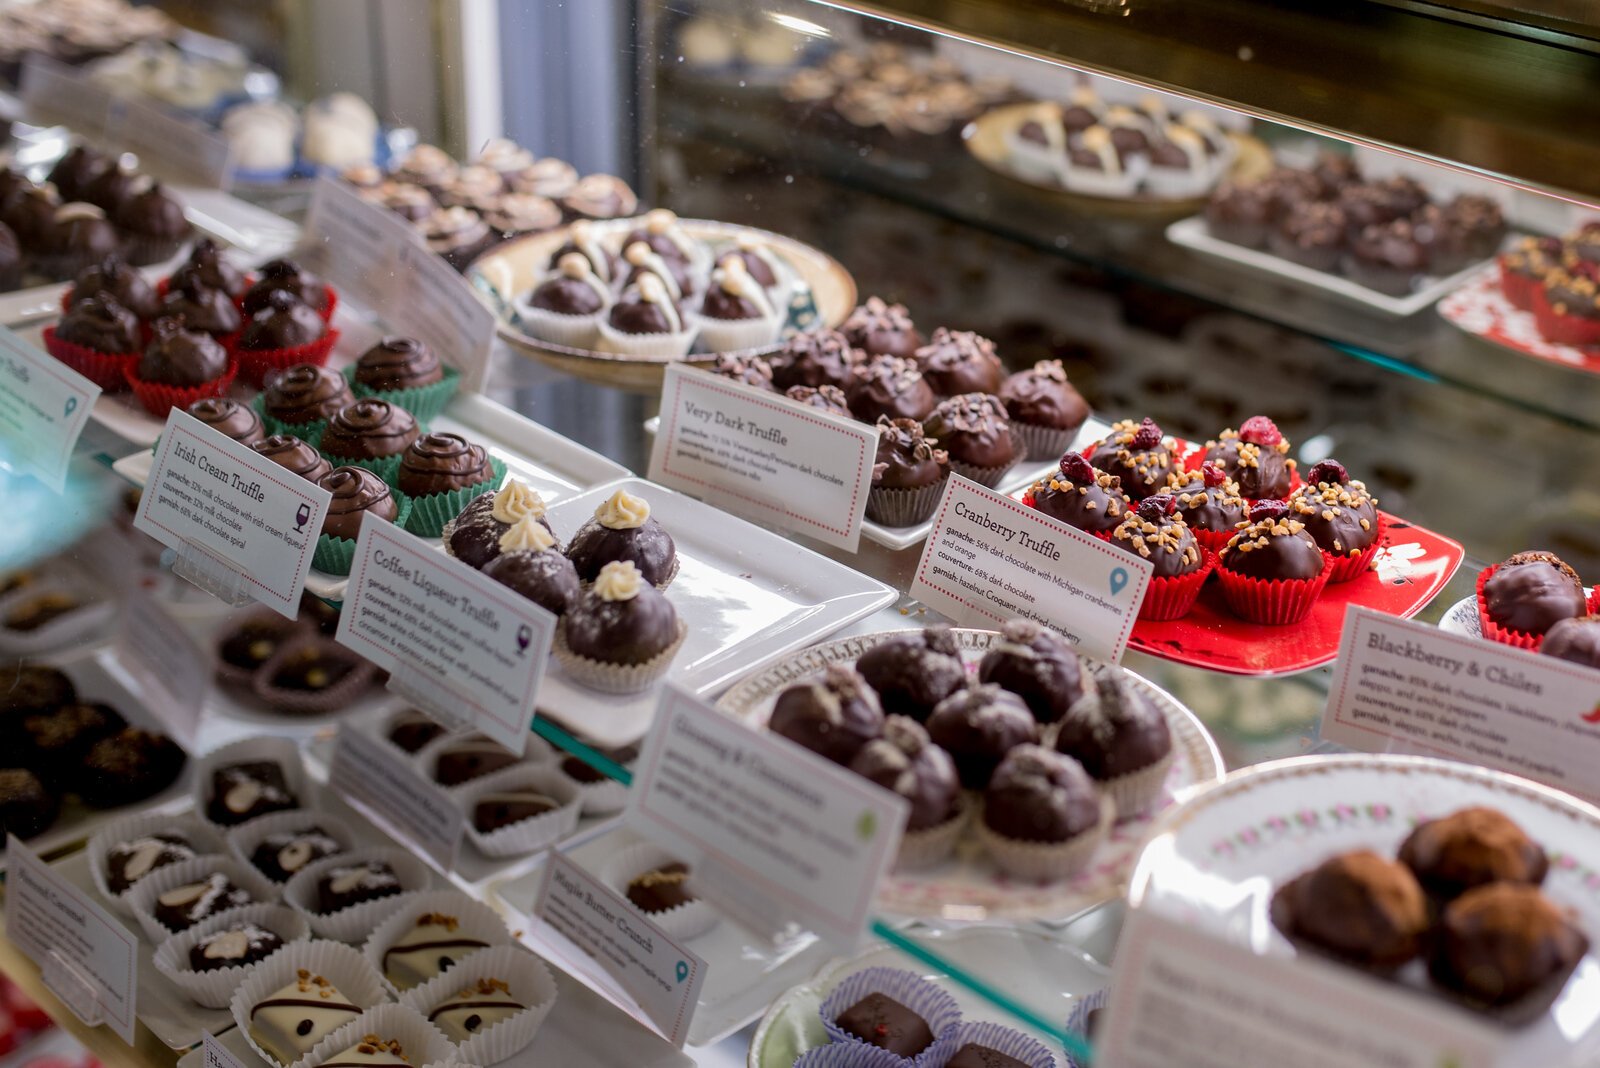 Truffles, truffles, and more truffles at Confections with Convictions